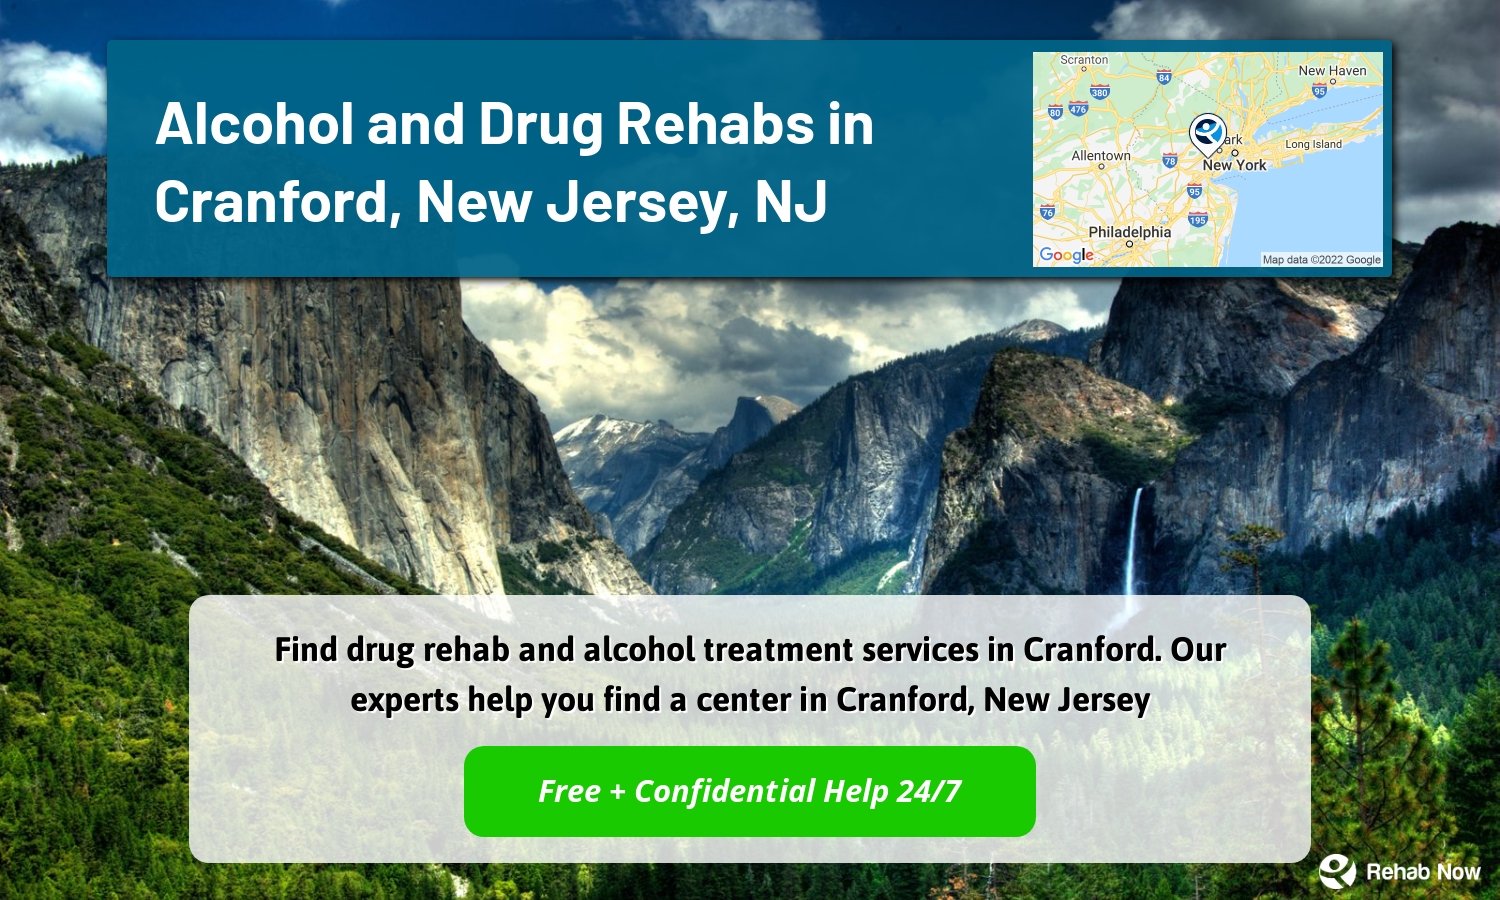 Find drug rehab and alcohol treatment services in Cranford. Our experts help you find a center in Cranford, New Jersey